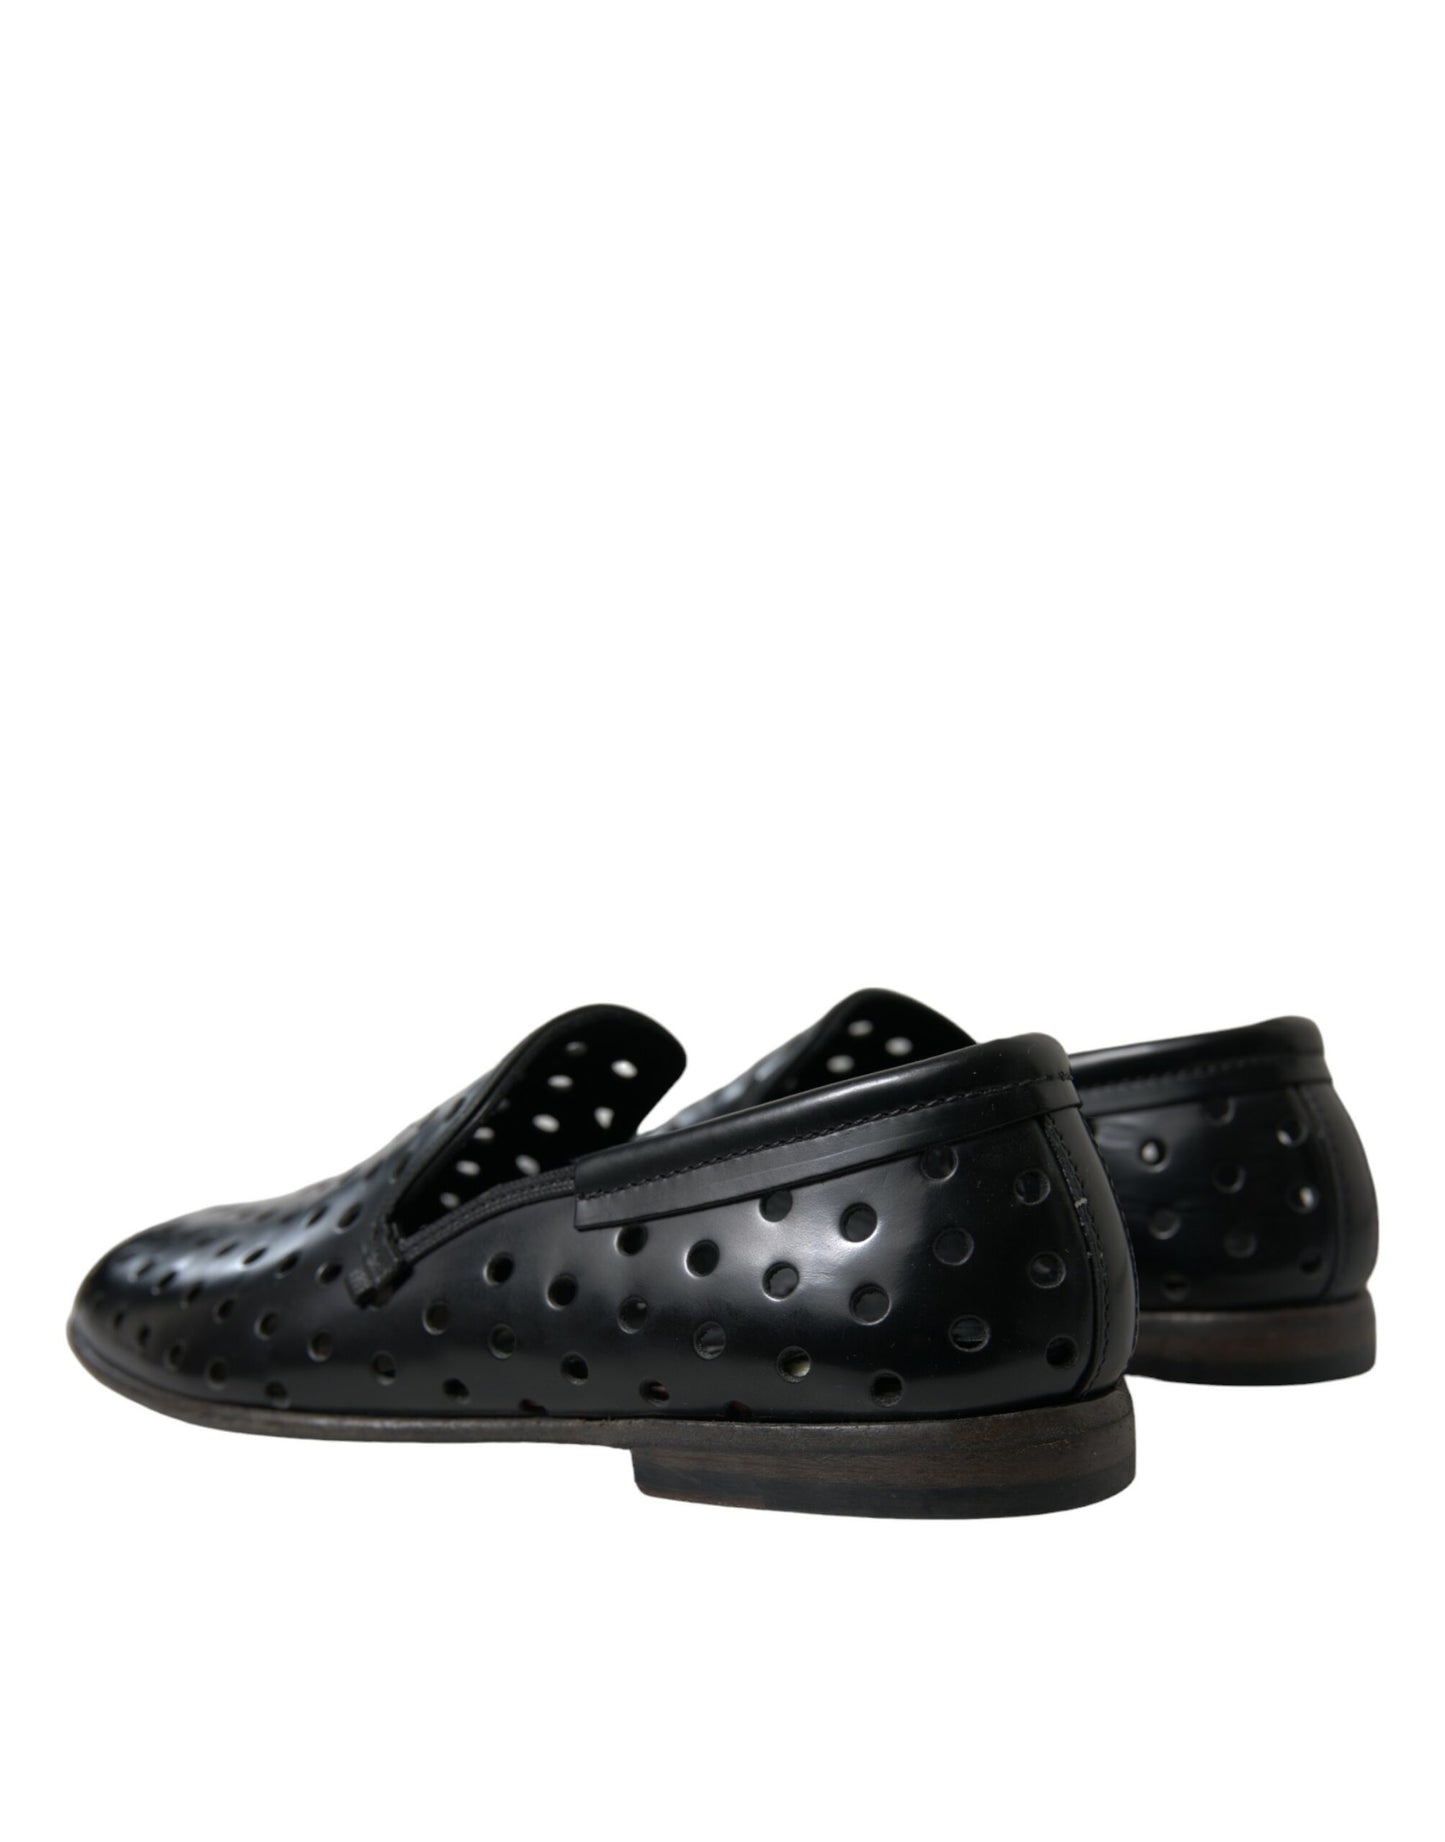 Elegant Black Leather Perforated Loafers